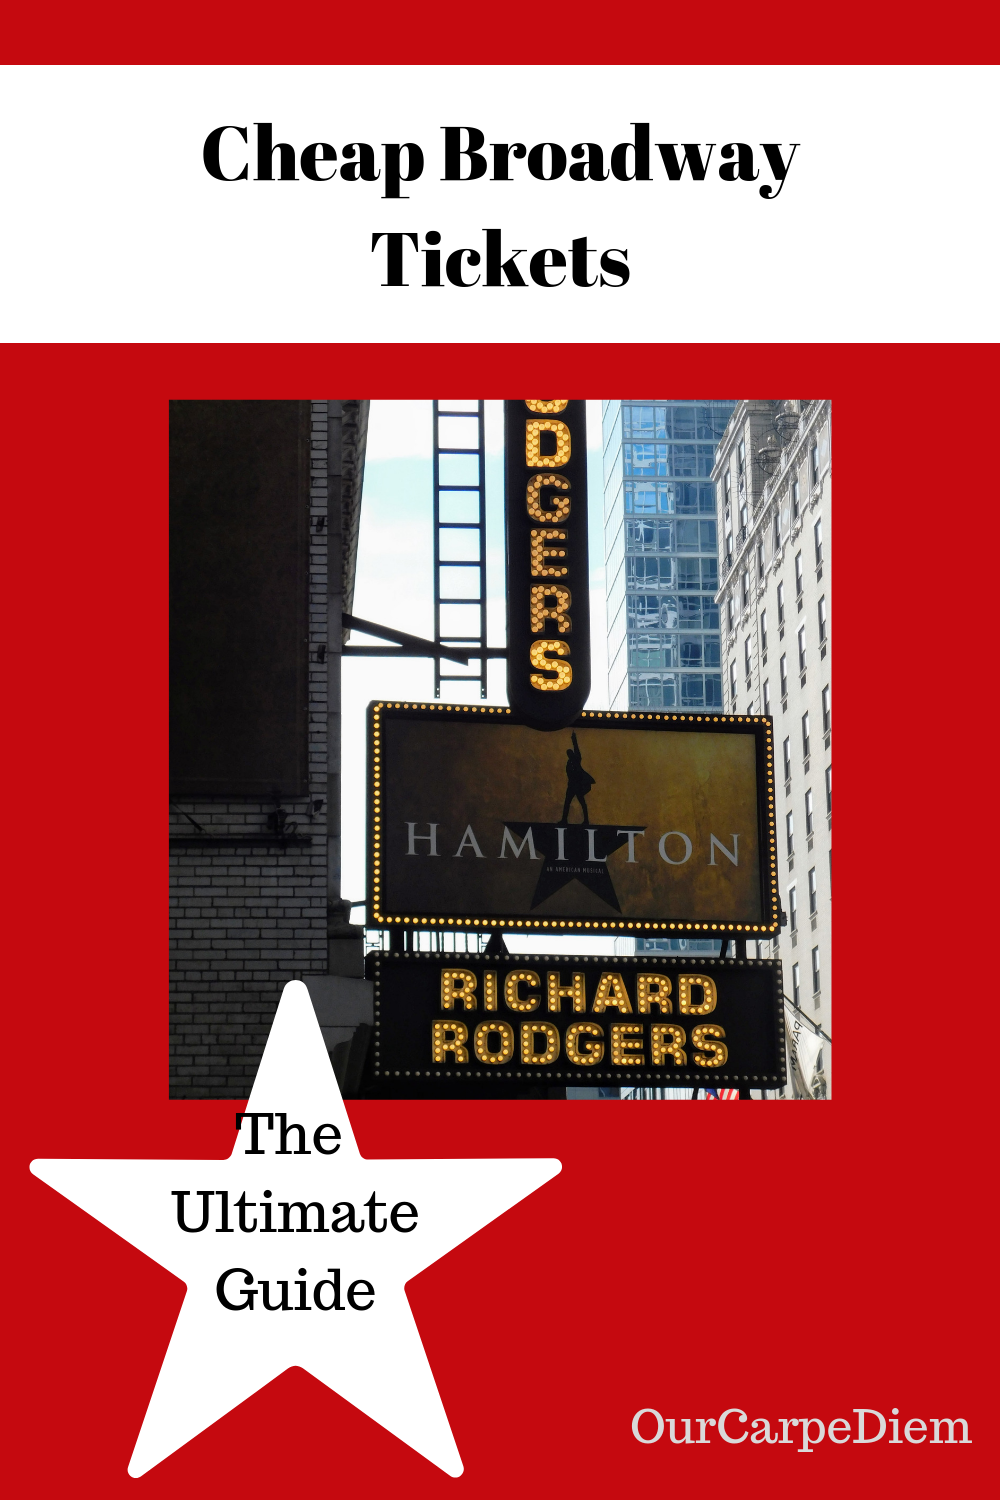 How to get Cheap Broadway Tickets The ultimate guide to affordable Broadway tickets. Giving you 5 different ways to #savemoney on your show tickets. Explains about #TKTS #TDF and #lotteries. When you travel to New York City, you have to see a Broadway show for sure. If only you could get discounted tickets to popular shows, like Hamilton, Mean Girls, Book of Mormon, Beautiful, Waitress and more. Never pay full price again. Find out how! #NYC #OurCarpeDiem #Broadway #traveltips #NewYorkCity